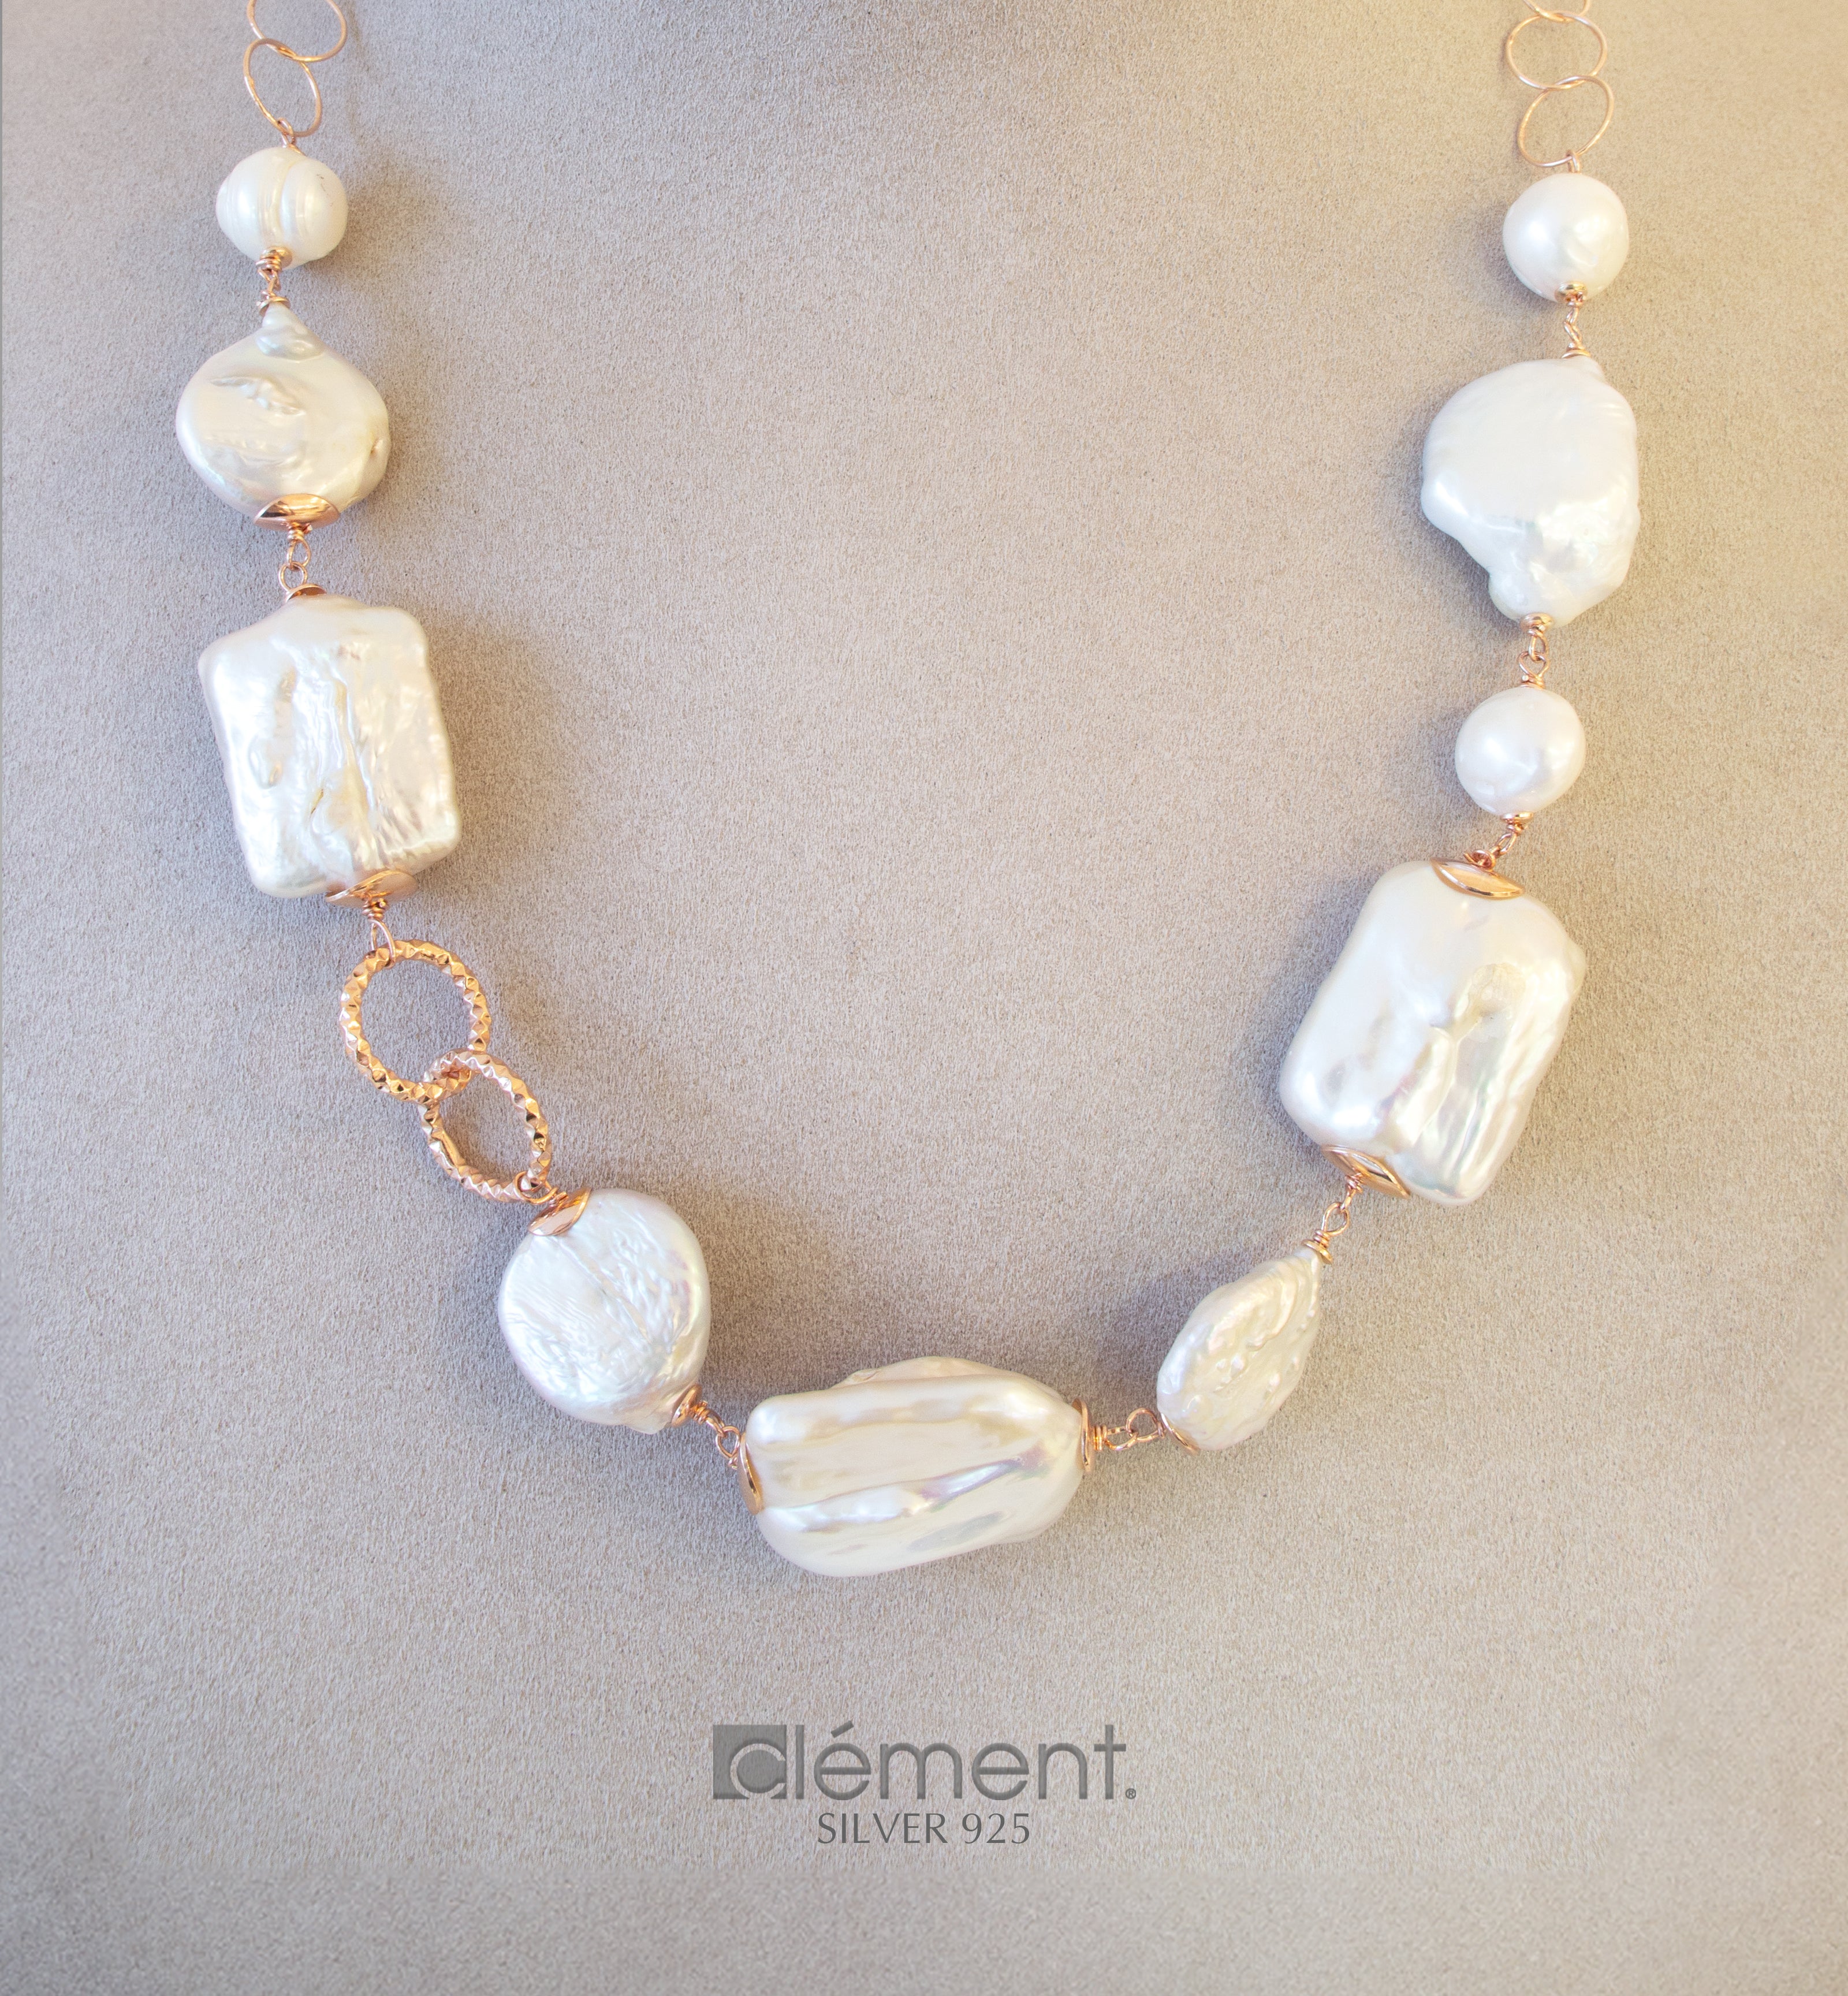 Silver 925 Necklace with FW Cultured Pearls